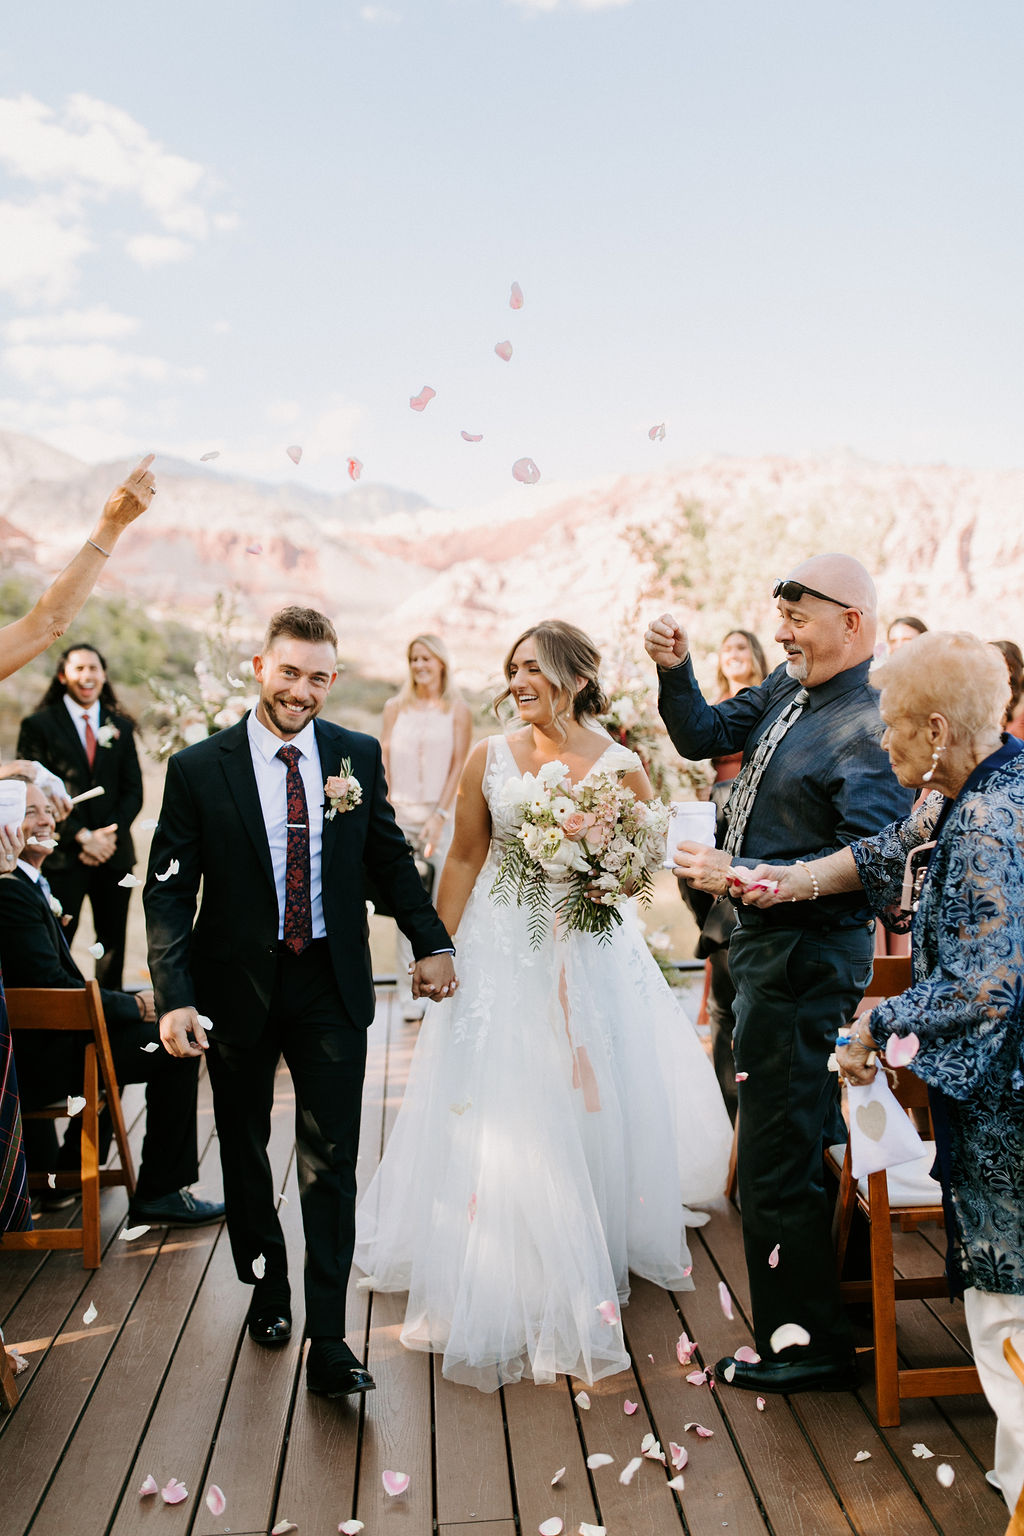 Bride and Groom walking down the aisle after getting married and rose petals being thrown for Romantic Desert & Backyard Micro-Wedding